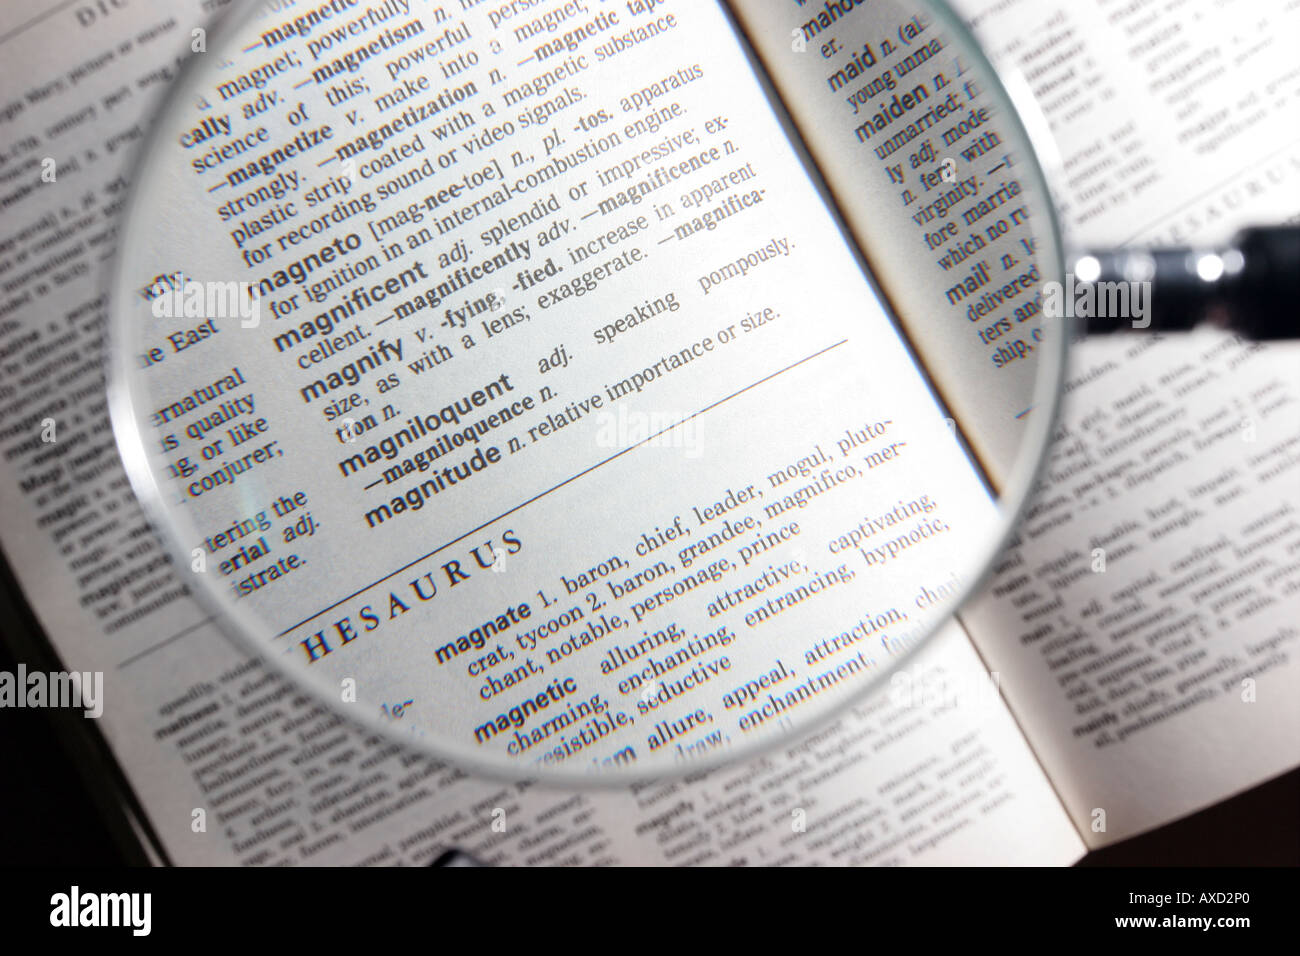 amplifikation Hykler Tredje Magnifying Glass Being Used to Make Print Larger in a Dictionary With Focus  on the Word Magnify Stock Photo - Alamy